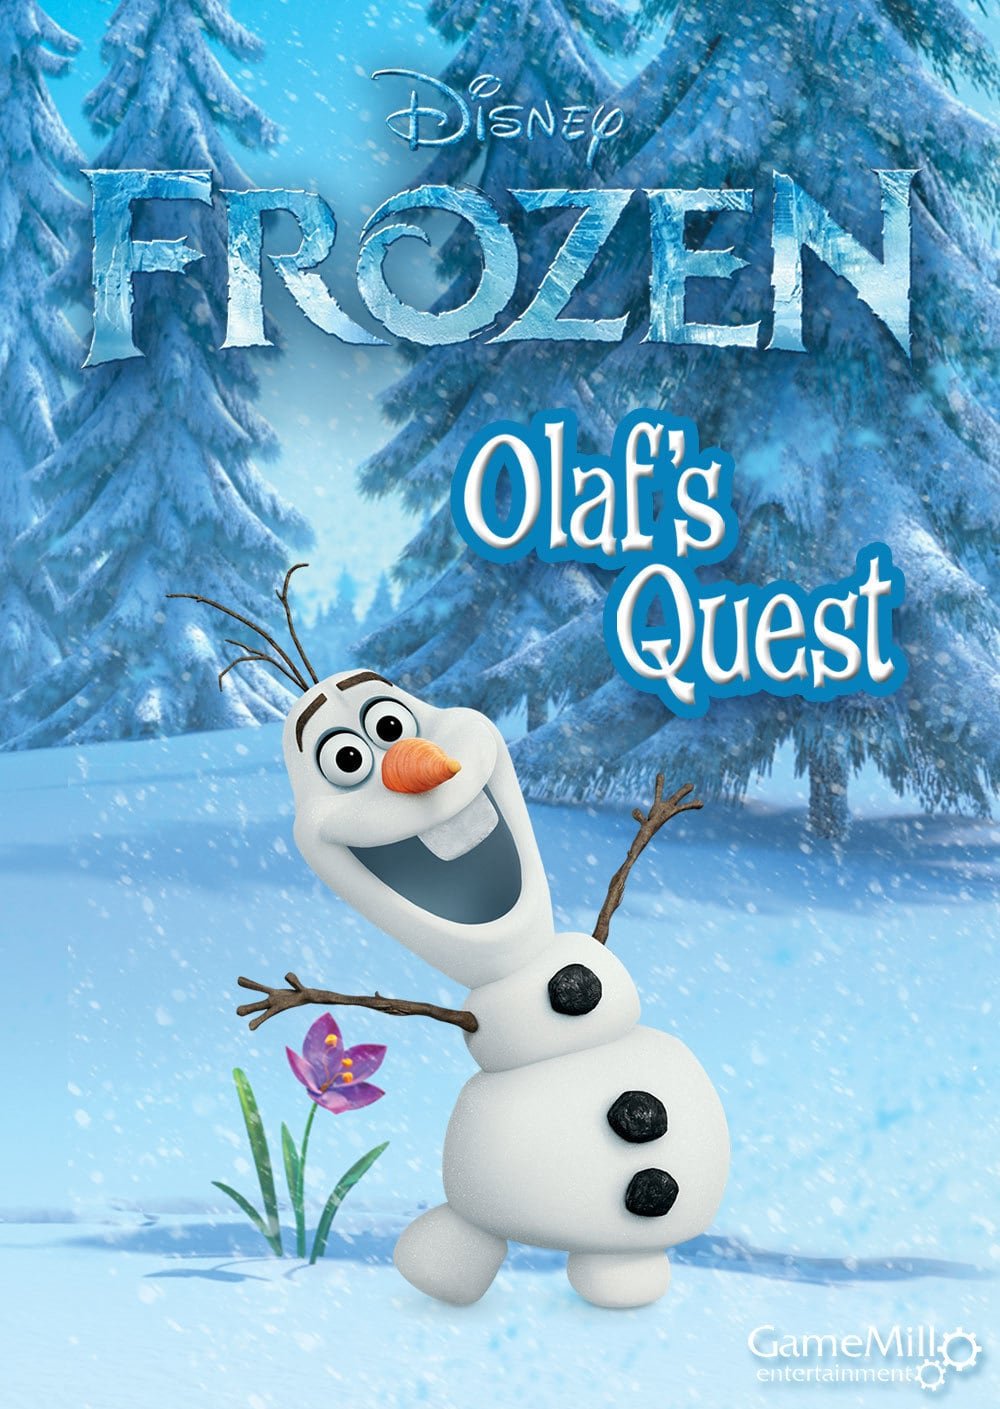 Image of Frozen: Olaf's Quest